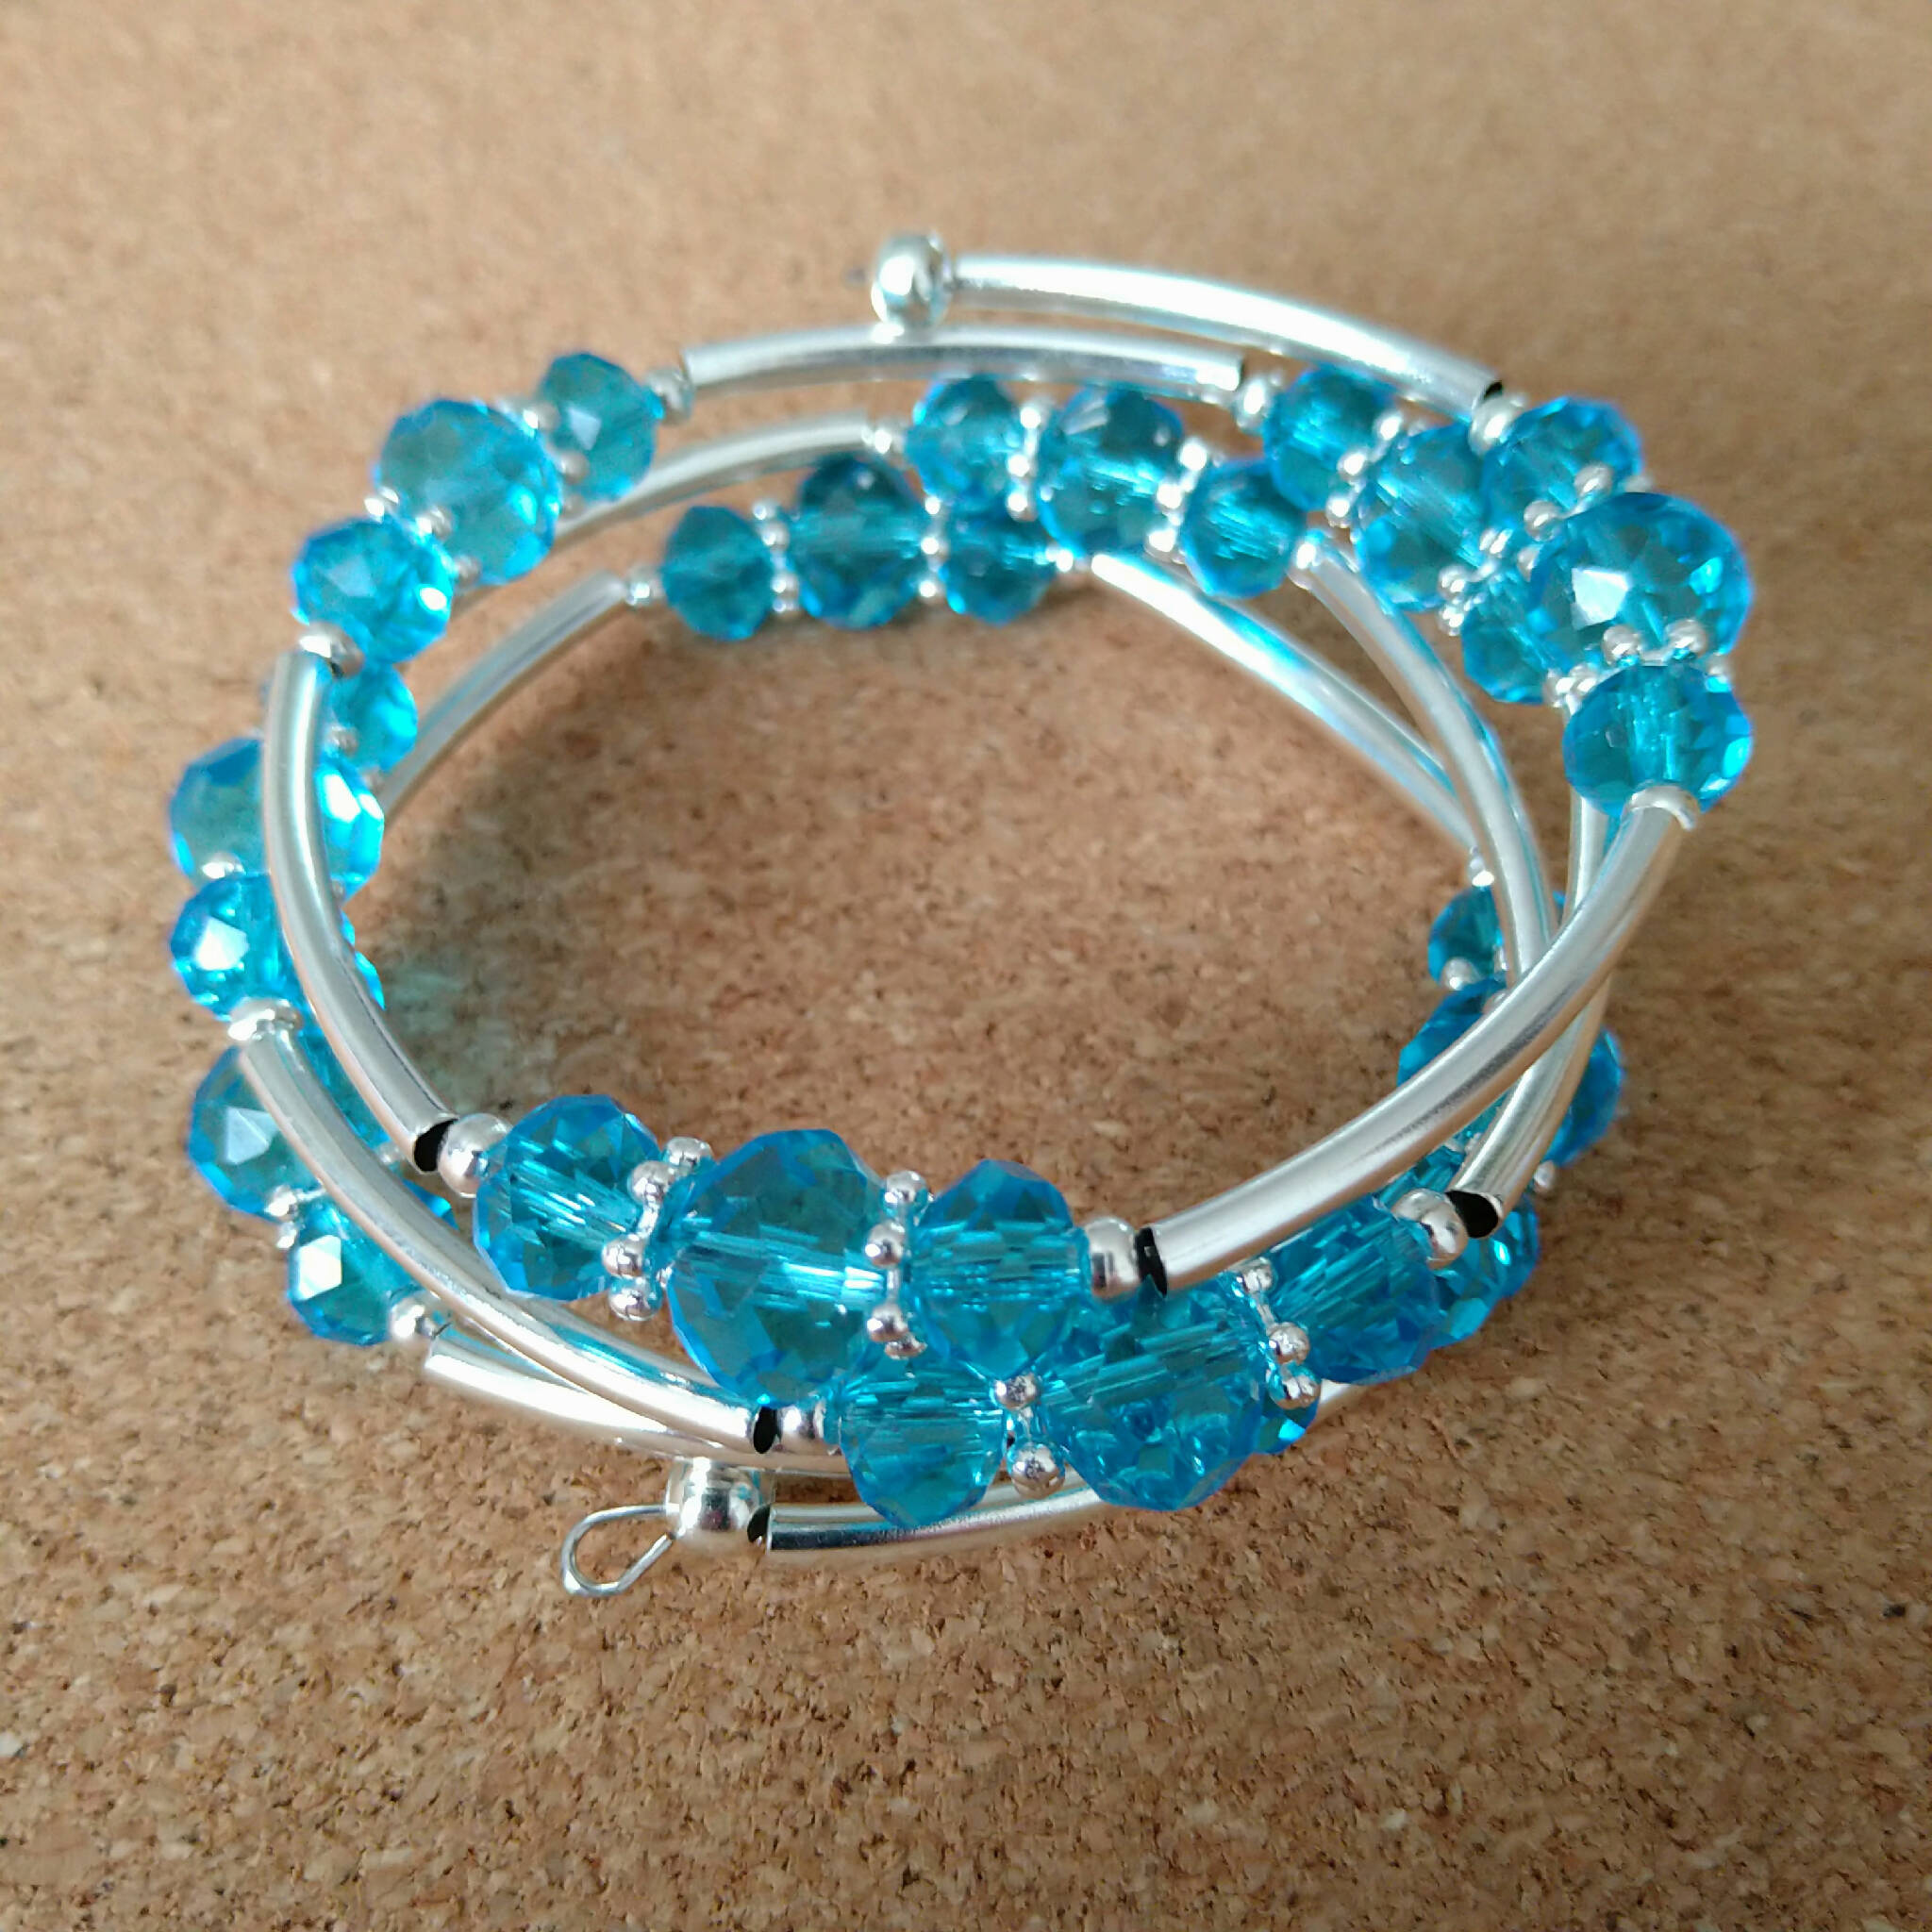 3 strand silver toned memory wire bangle with turquoise coloured beads, 6cm diameter